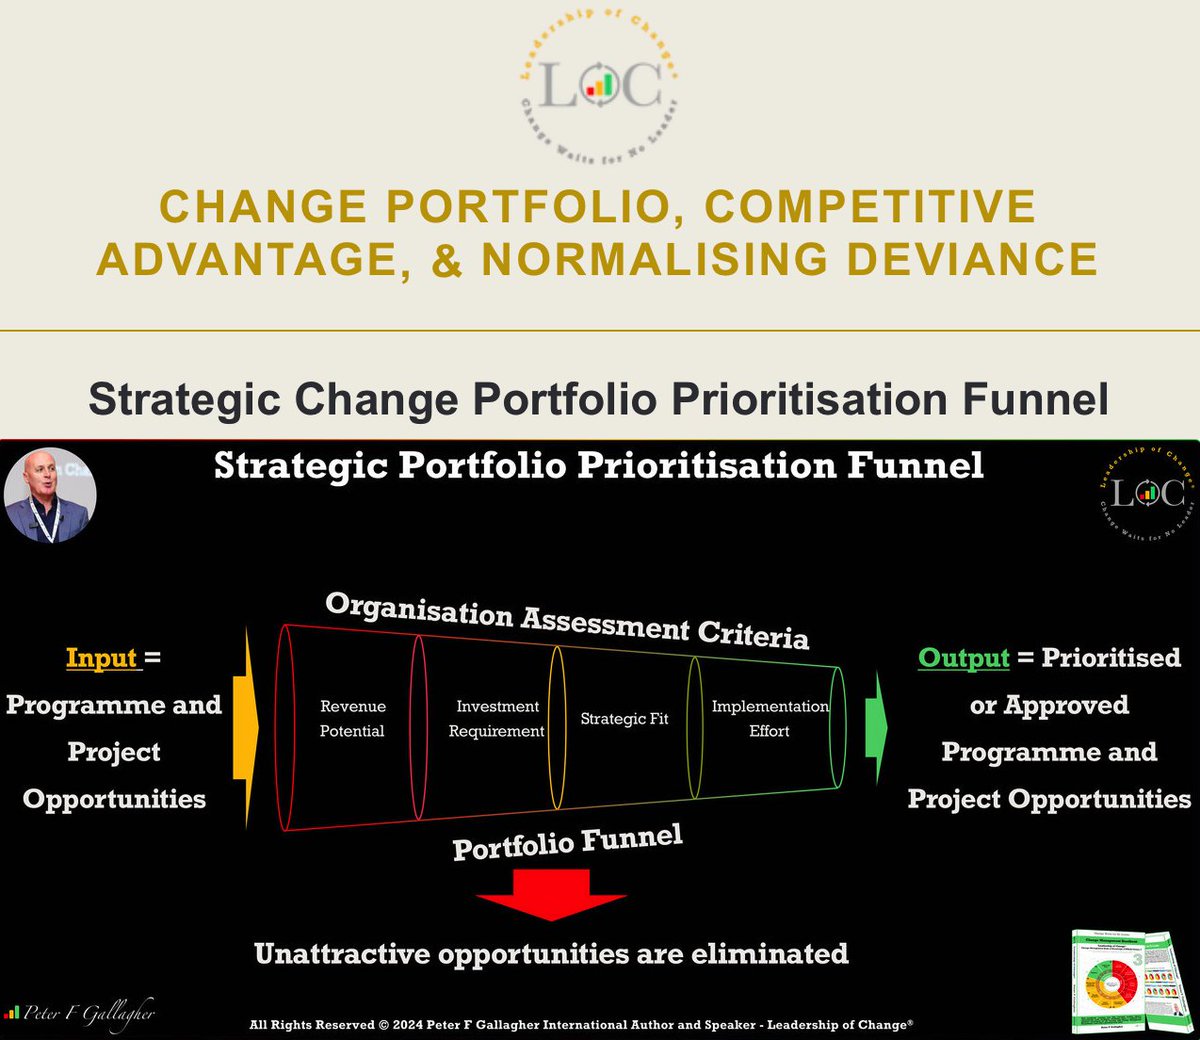 #Leadershipofchange Weekly Email #89 Strategic Change Portfolio Prioritisation Funnel. Competitive Advantage With Superior Change Leadership Capability FCRQ: Change Leaders Do Not Normalise Deviance #changemanagement rebrand.ly/db0eb8